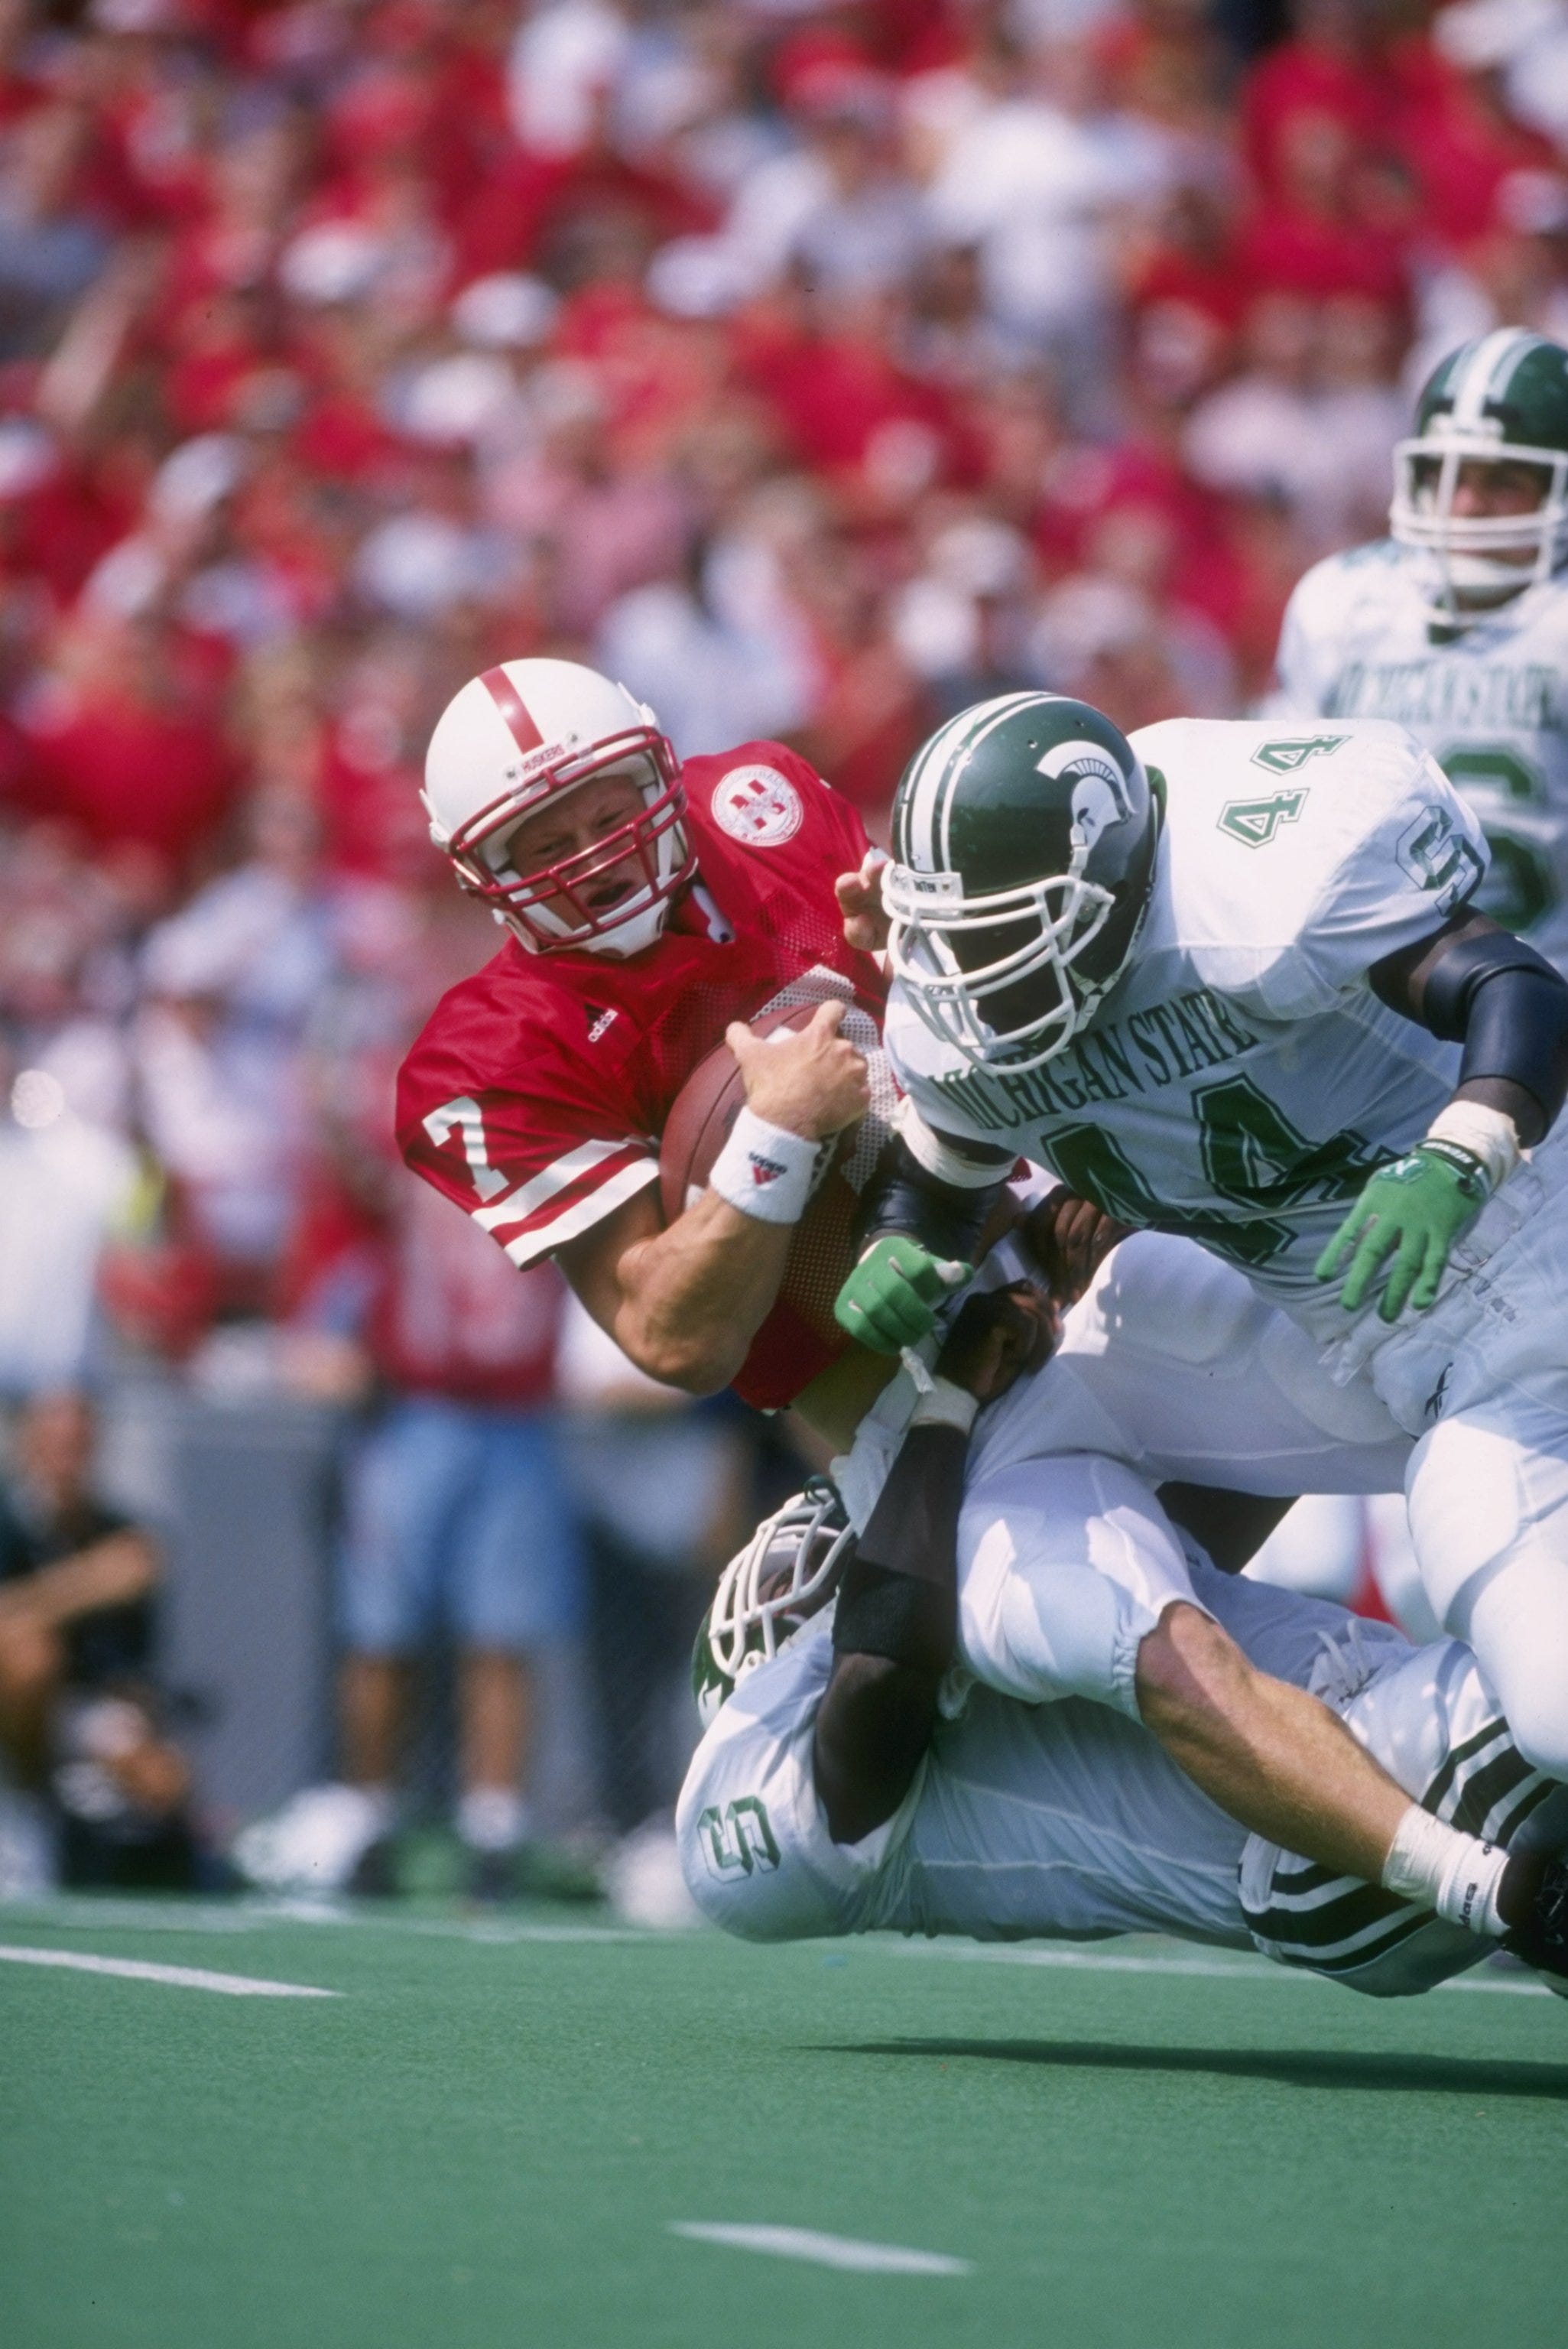 LINEBACKER – Ike Reese, 1994-97: His freshman season came before 1995, but it was his consistency and outstanding senior year that landed Reese on the list. His 137 tackles in 1997 still ranks among the top 10 in program history and his 420 career stops are good for fourth overall. A third-team All-American in 1997, Reese’s legacy at Michigan State is likely hindered by the fact the Spartans never finished with more than seven wins in any of his seasons.